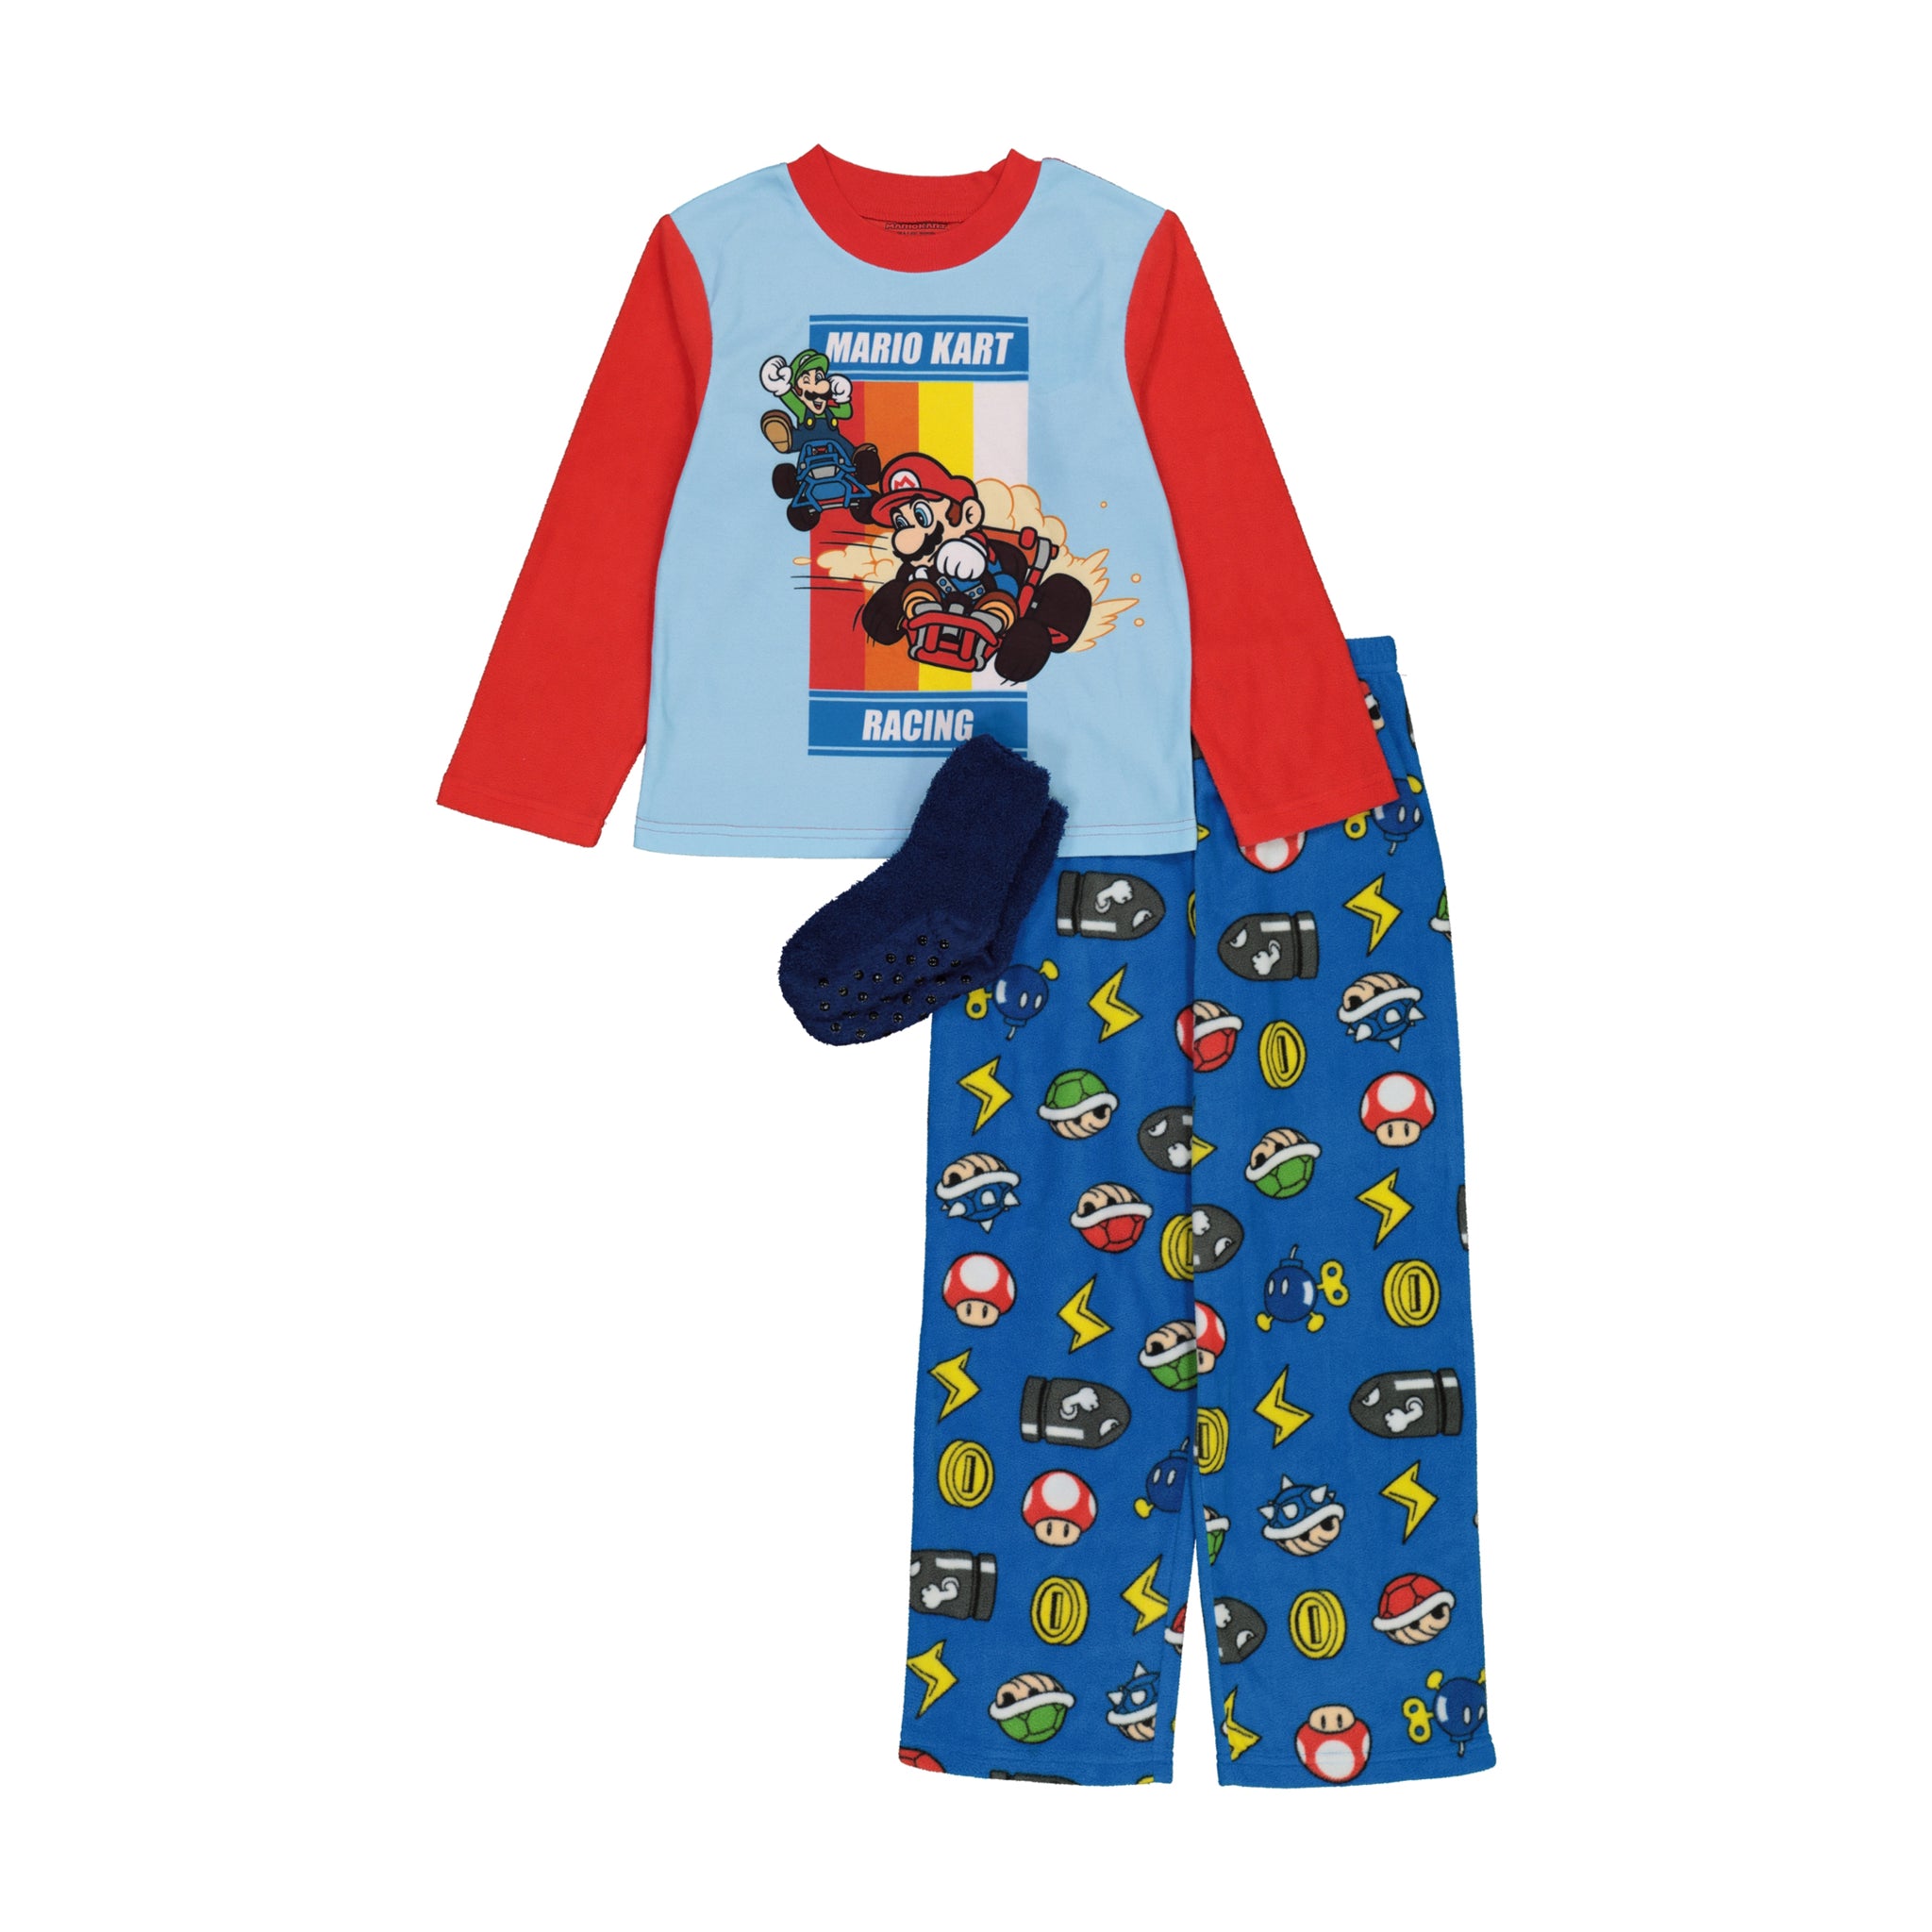 Mario Kart Boys Pajama Set with Socks, Long Sleeve Top and Pants 3PC PJ Outfit, 4-10, Red - FPI Ventures